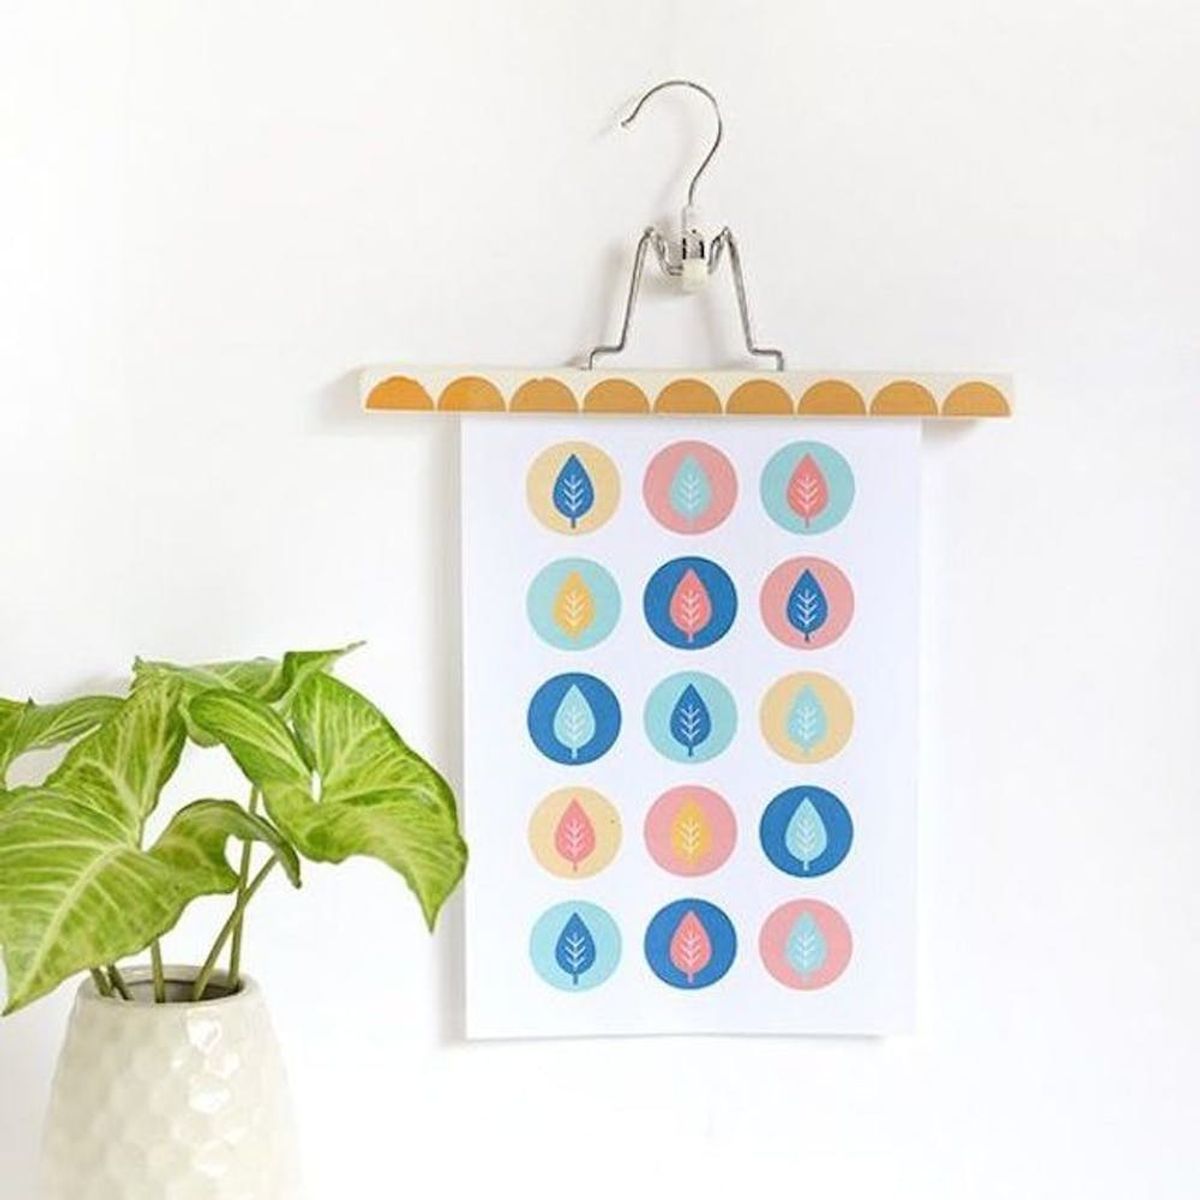 14 Free Colorful Printables to Brighten Up Your Home This Winter